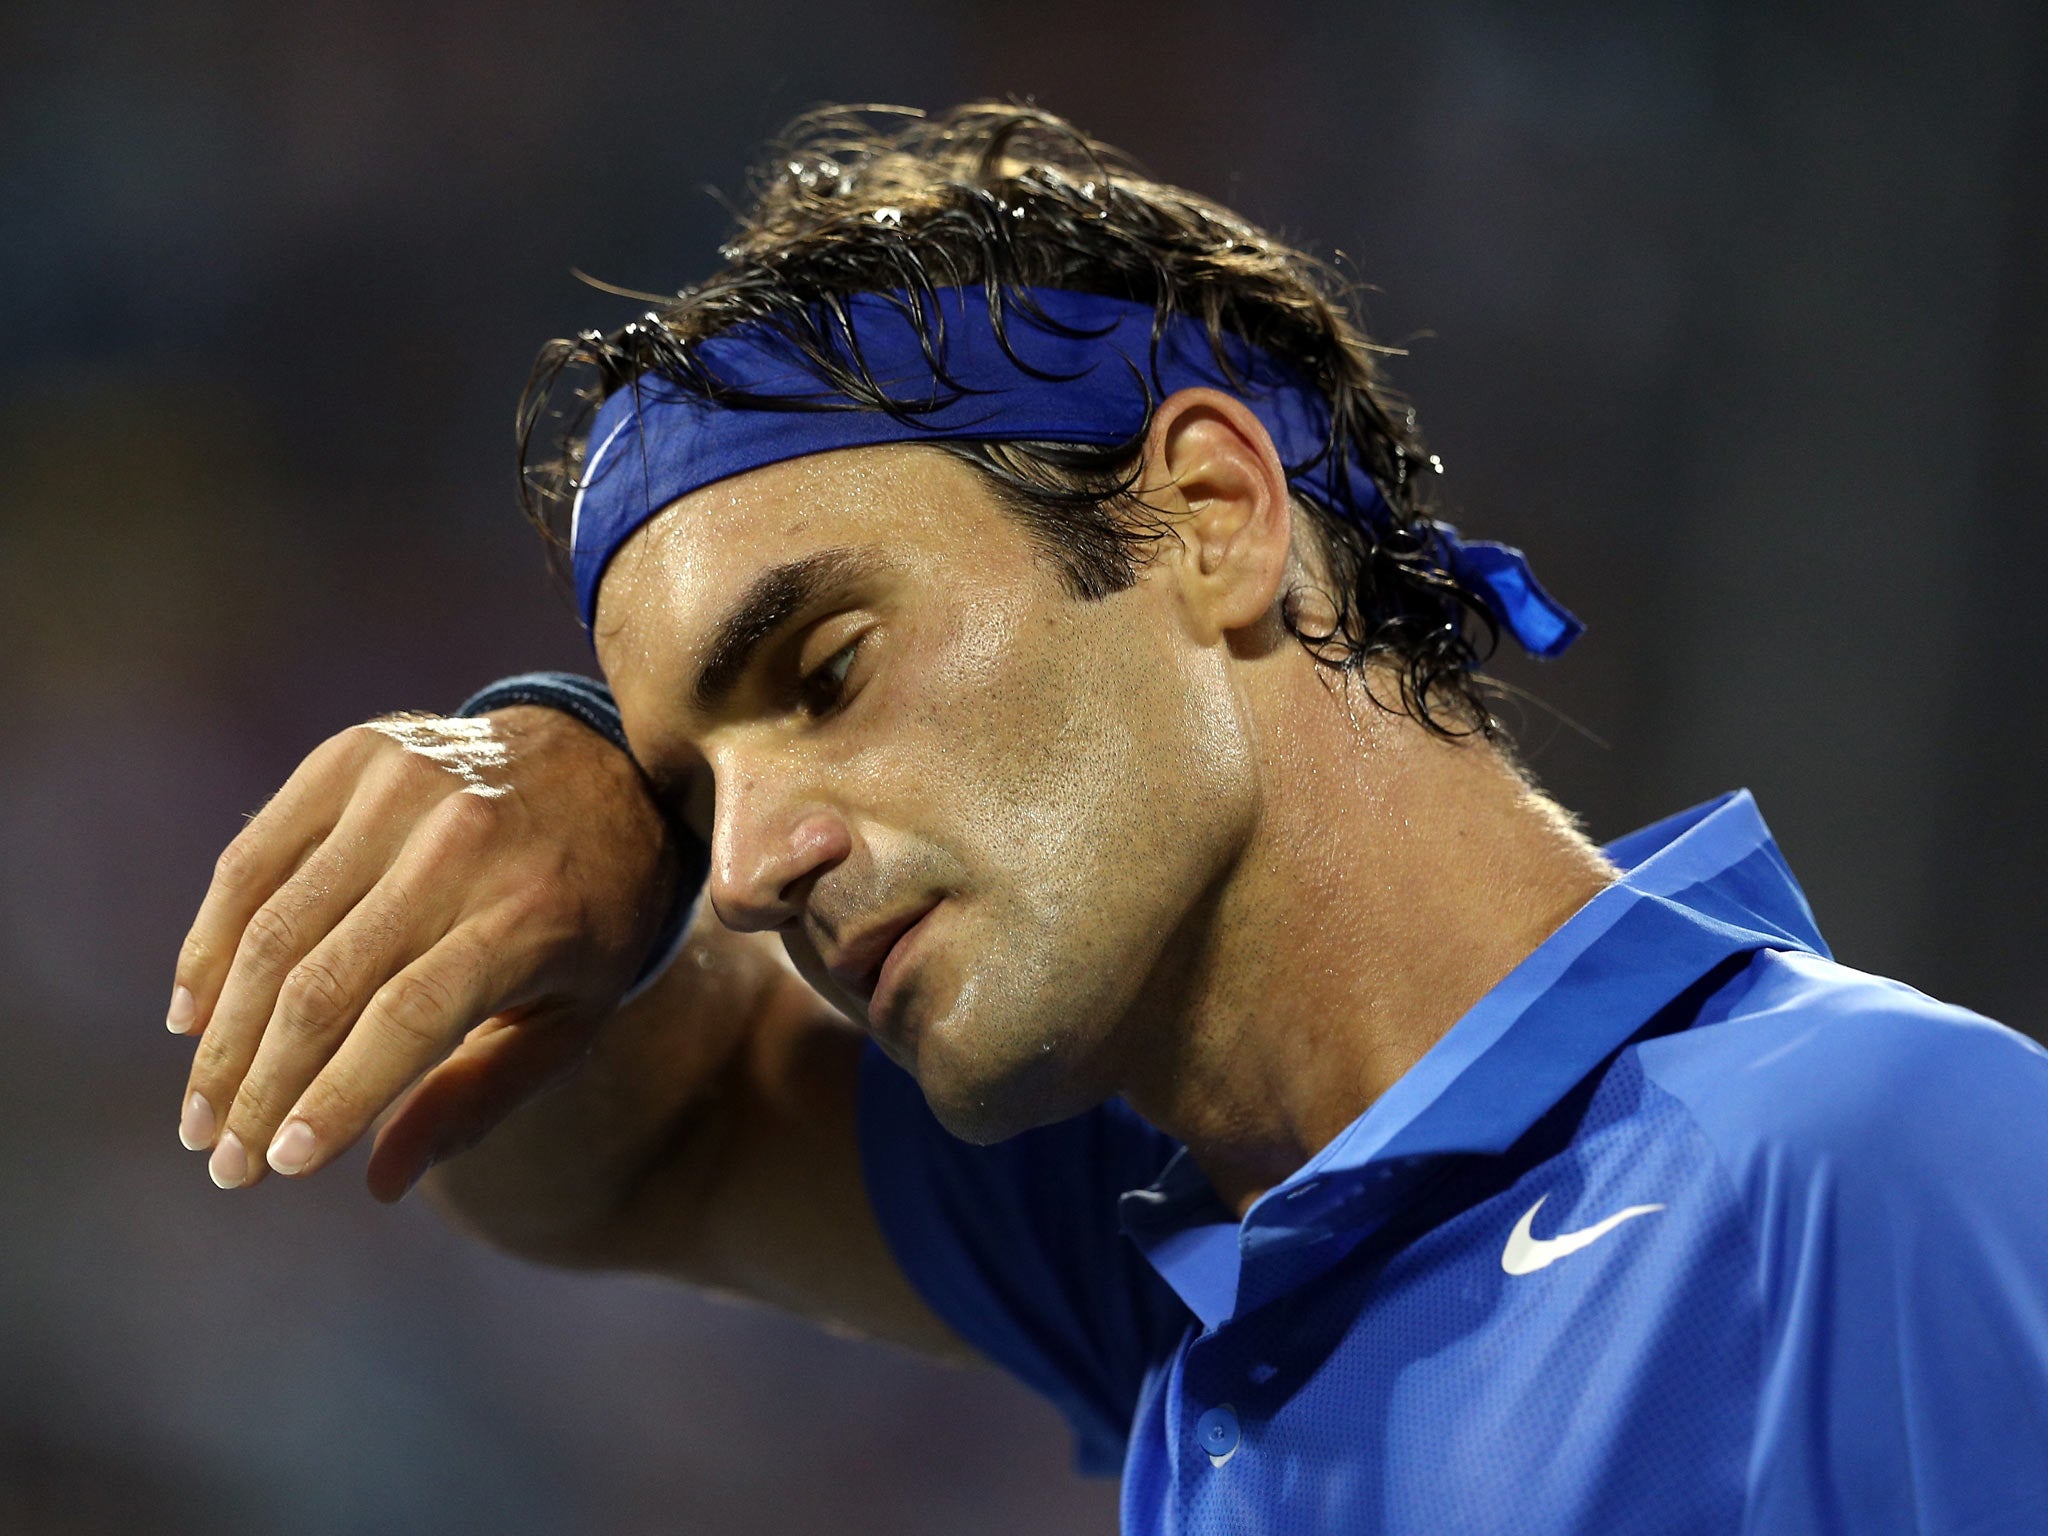 Roger Federer pictured in his defeat at the US Open